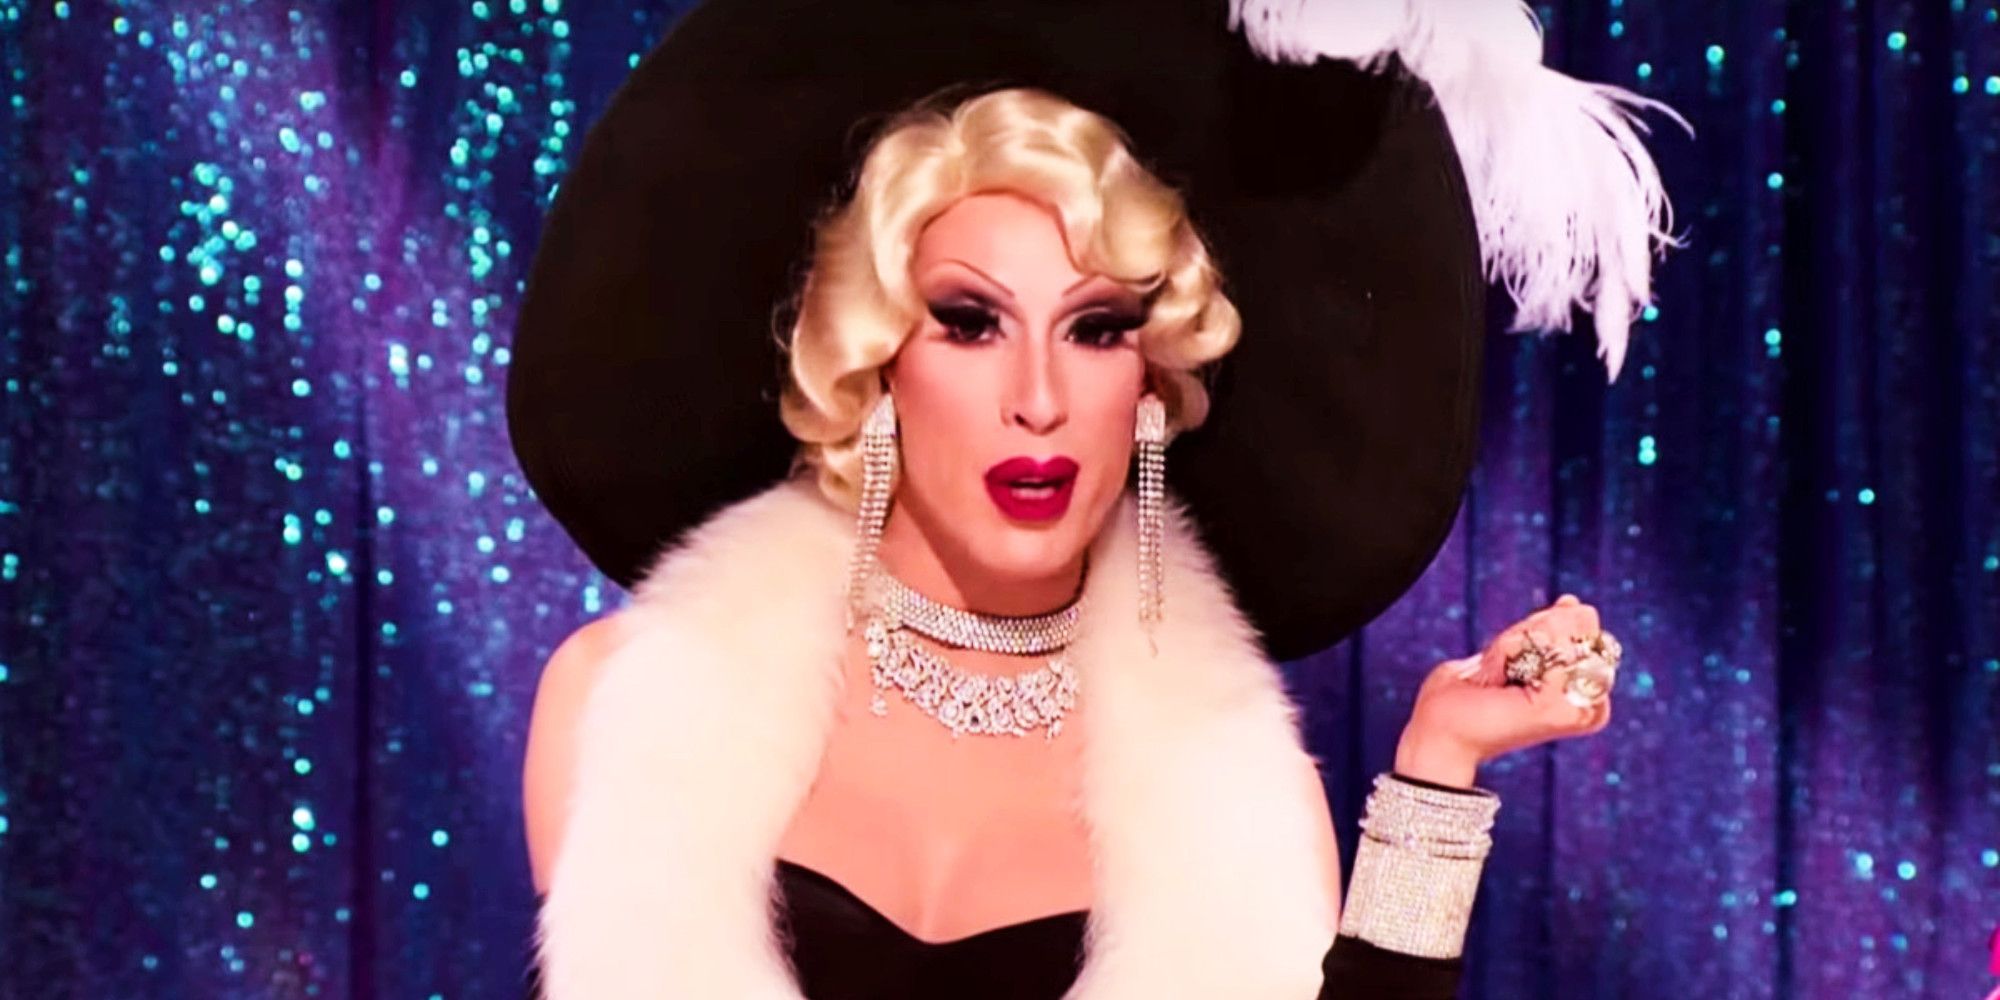 Drag queen Alaska portrays Mae West during the Snatch Game on RuPaul's Drag Race.